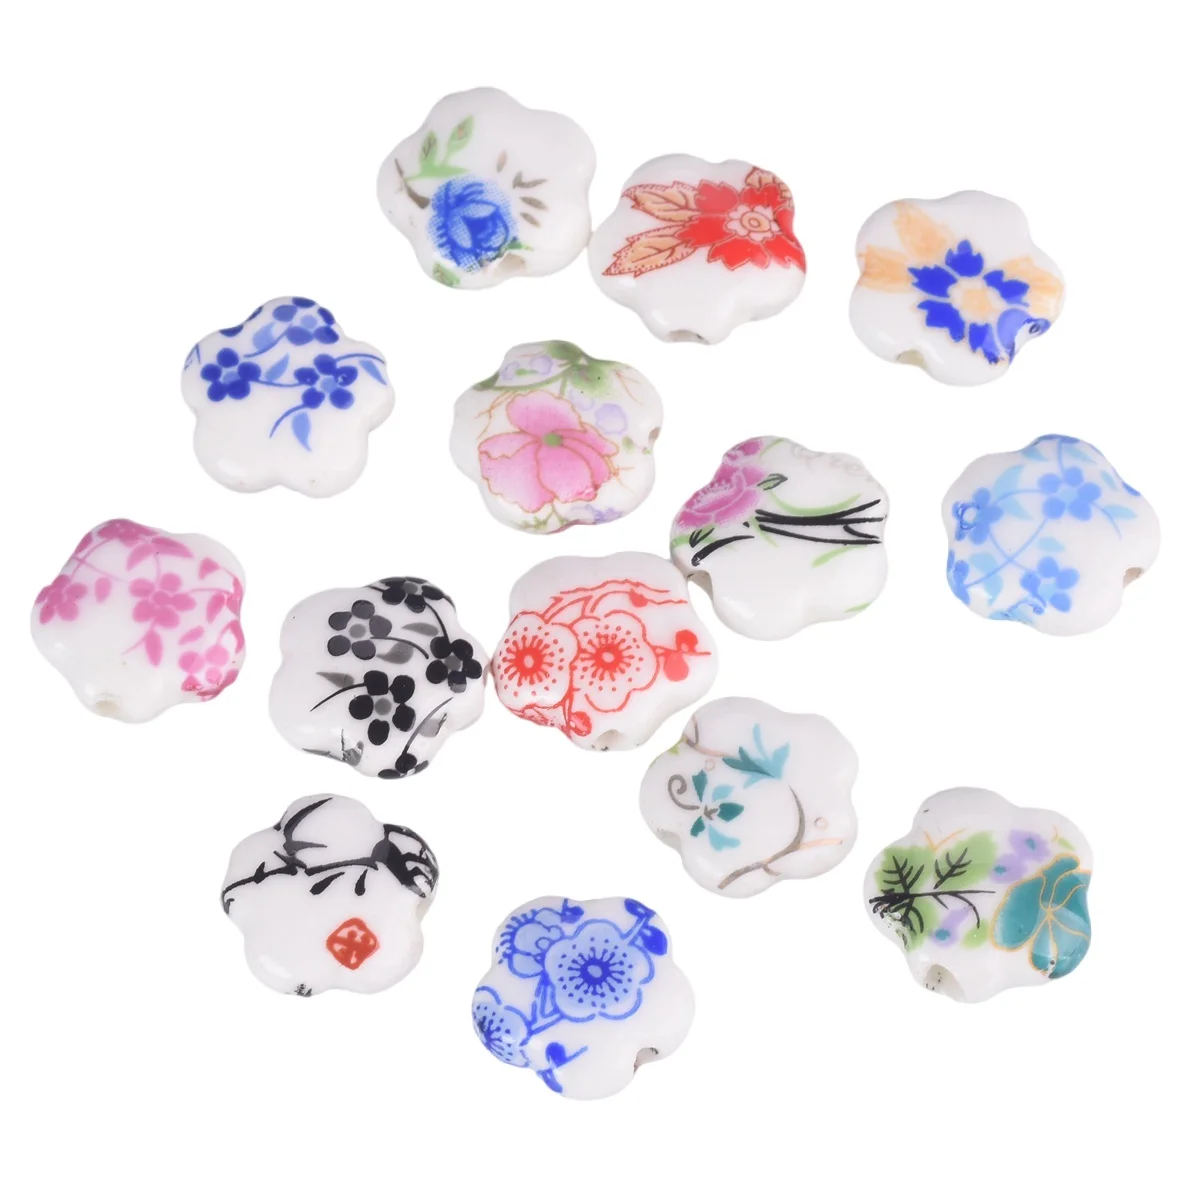 10pcs 15mm Flower Shape Patterns Ceramic Porcelain Loose Crafts Beads Lot For Jewelry Making DIY Findings